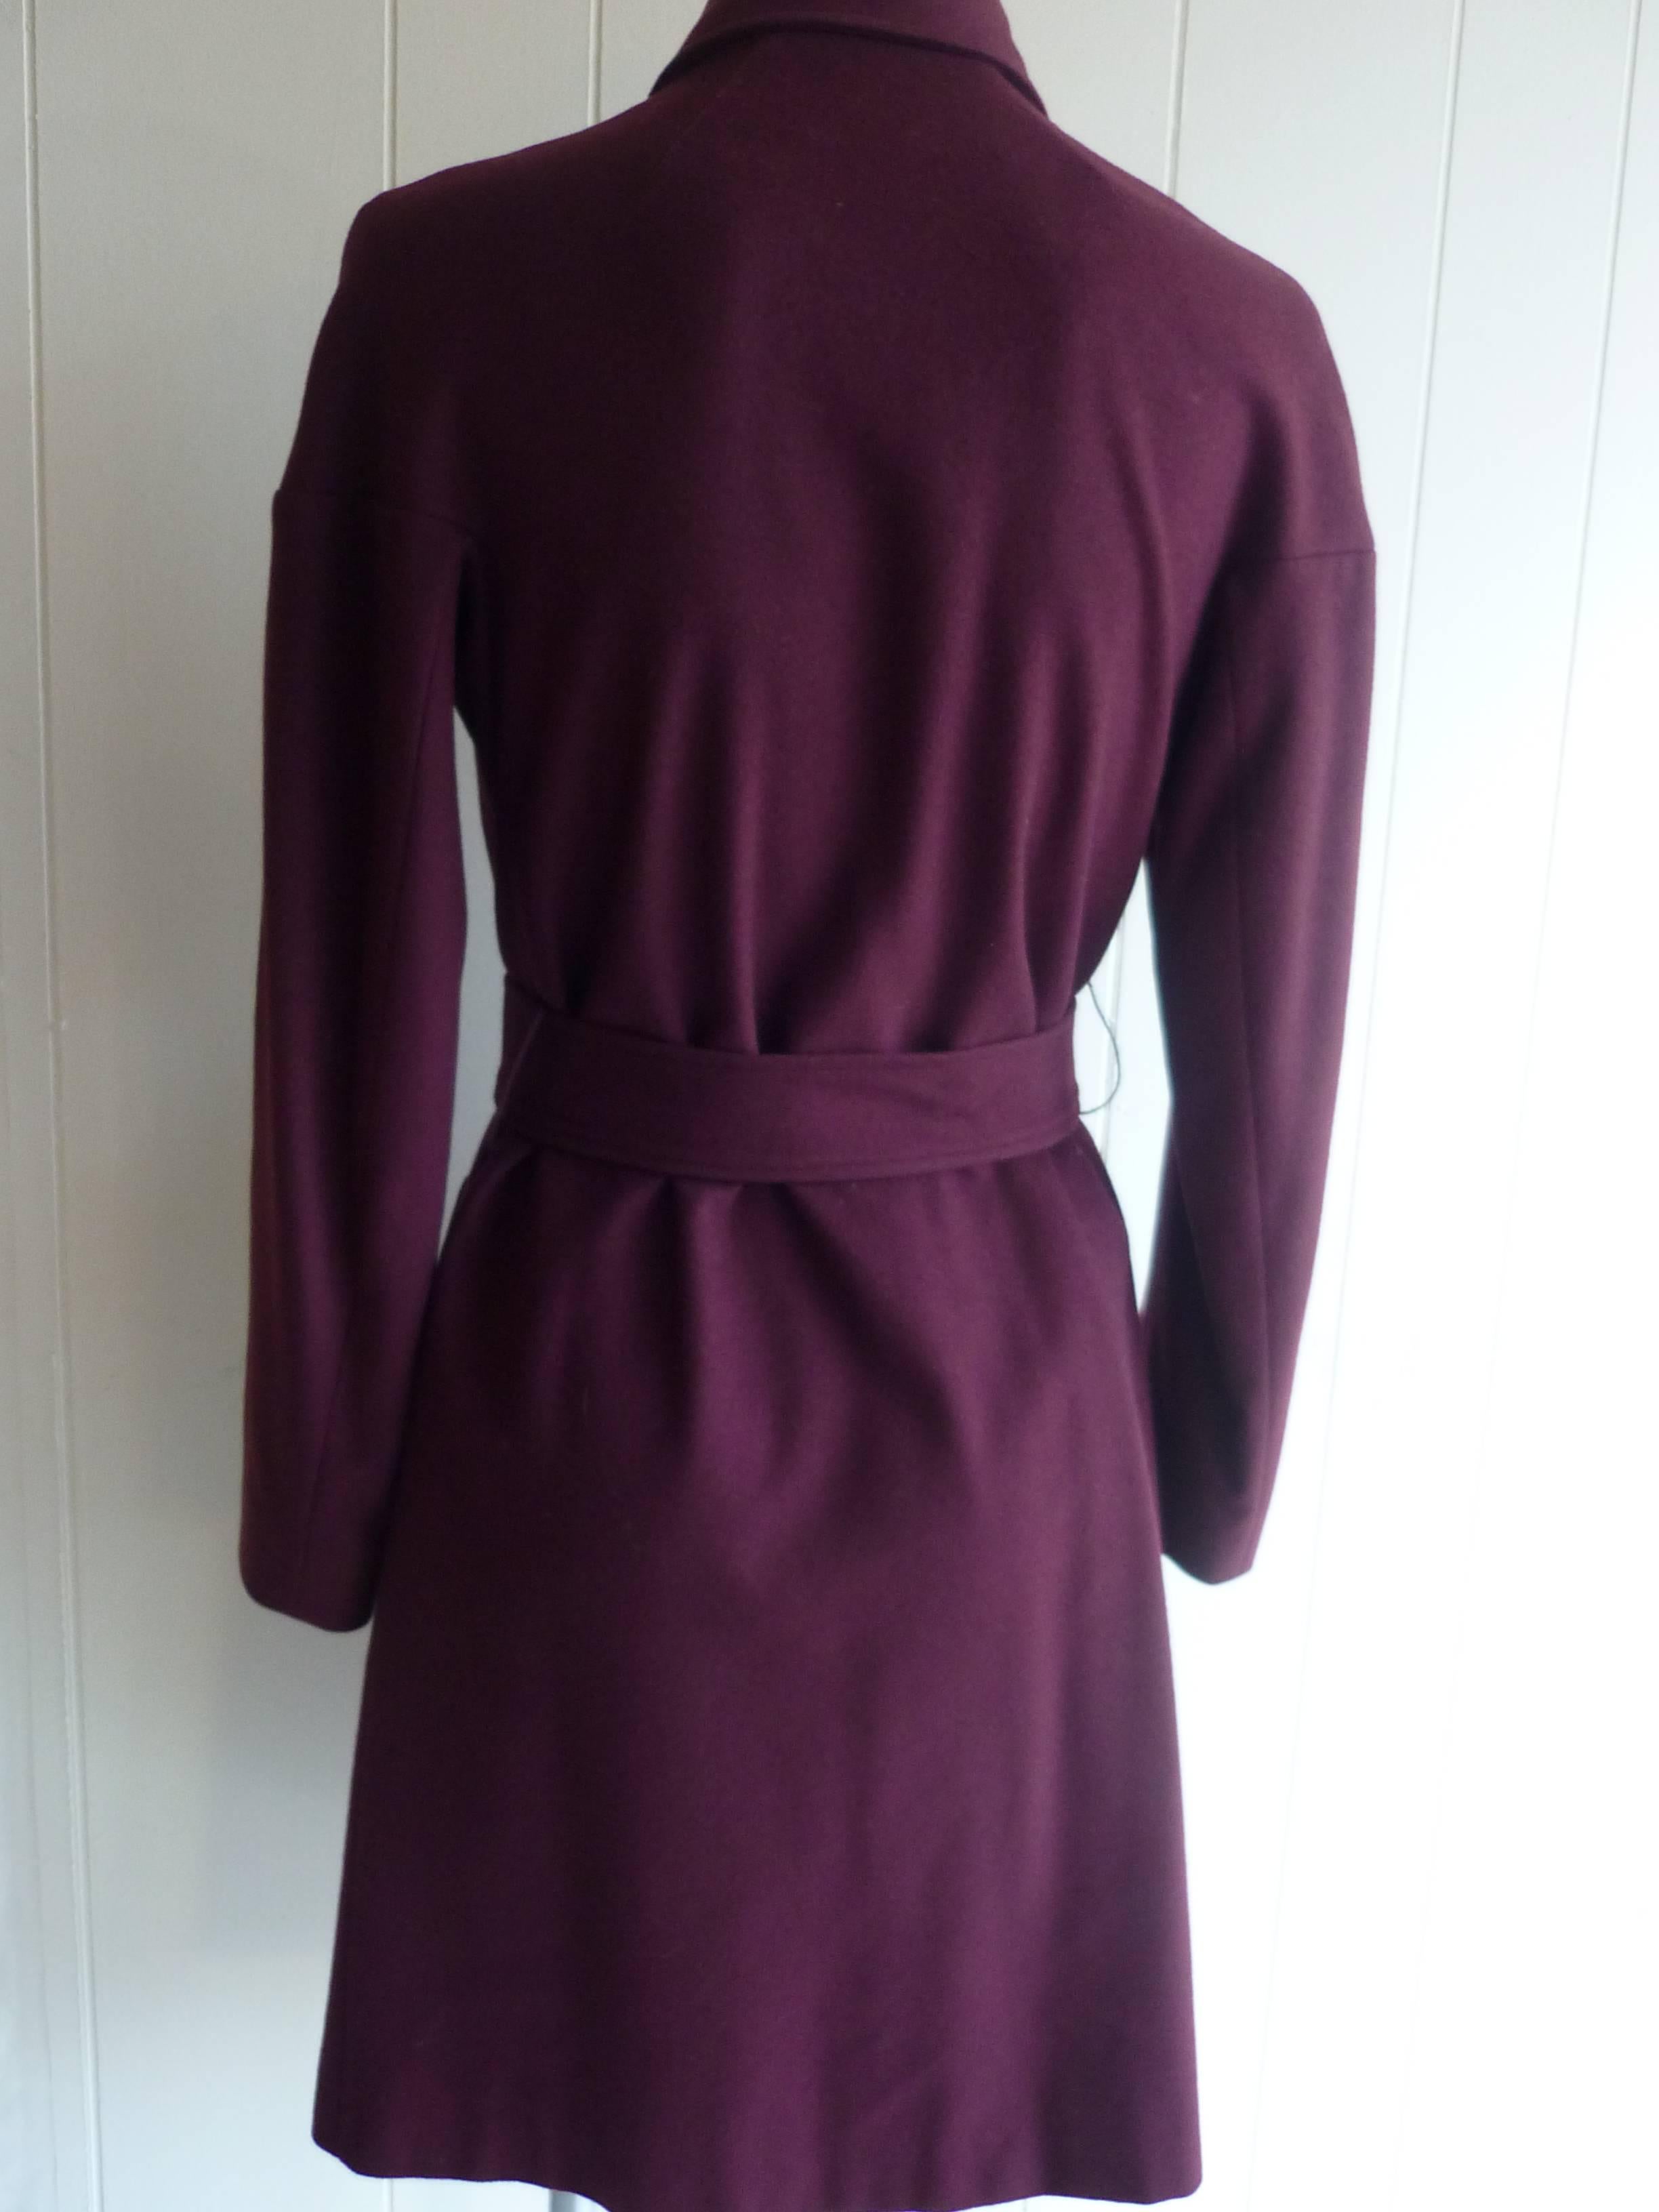 Lovely burgundy colored wool belted wool coat, features notched lapels, magnetic closure at front, as well as eye and hook closure and magnetic button at neck if you want complete coverage. There are also two slit side pocktets. Made in France.